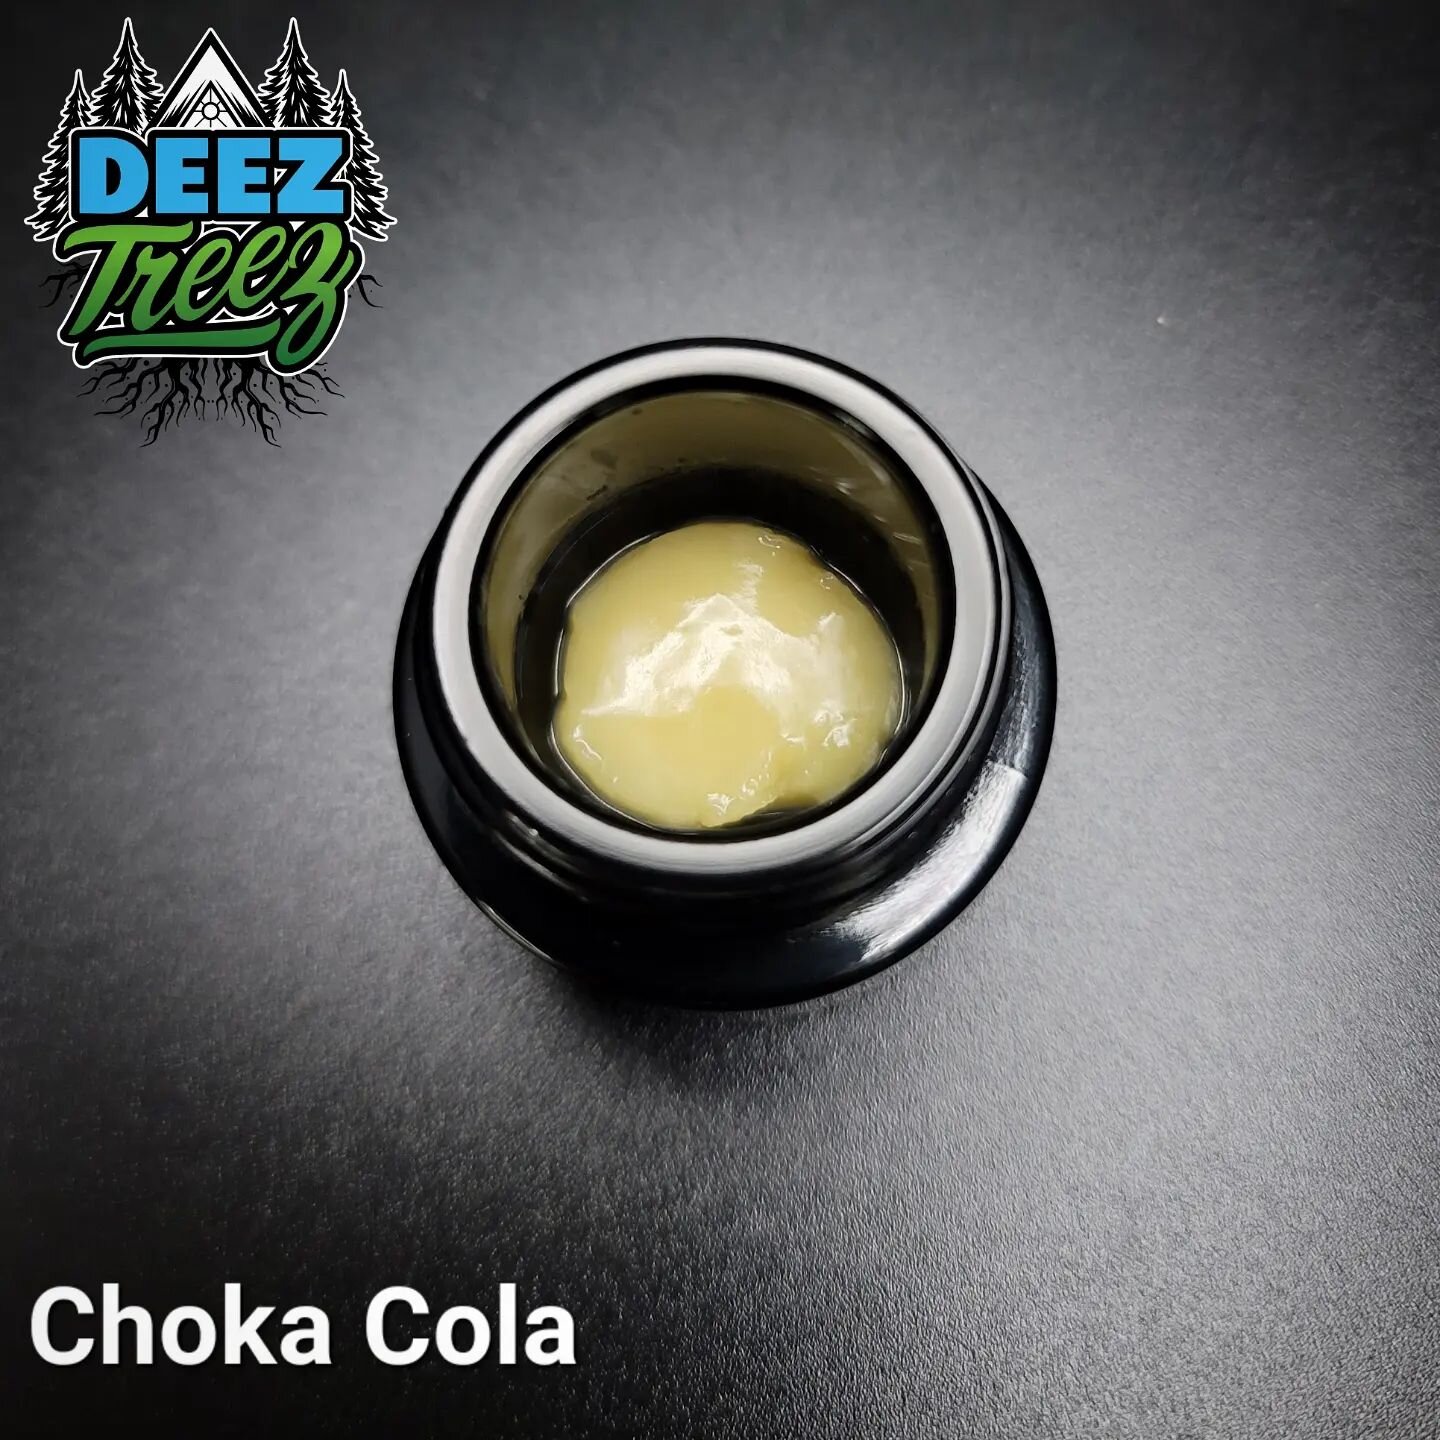 New Product Drop 🔥
.
We are excited to announce that we have another offering from our good friends over at @_deez_treez 🌲
.
This release contains 4 flavors of some wicked fire hash rosin:
Choka Cola 🥤
Rainbow Beltz 🌈
Spritzer 🍬
Spritzola - (Spr